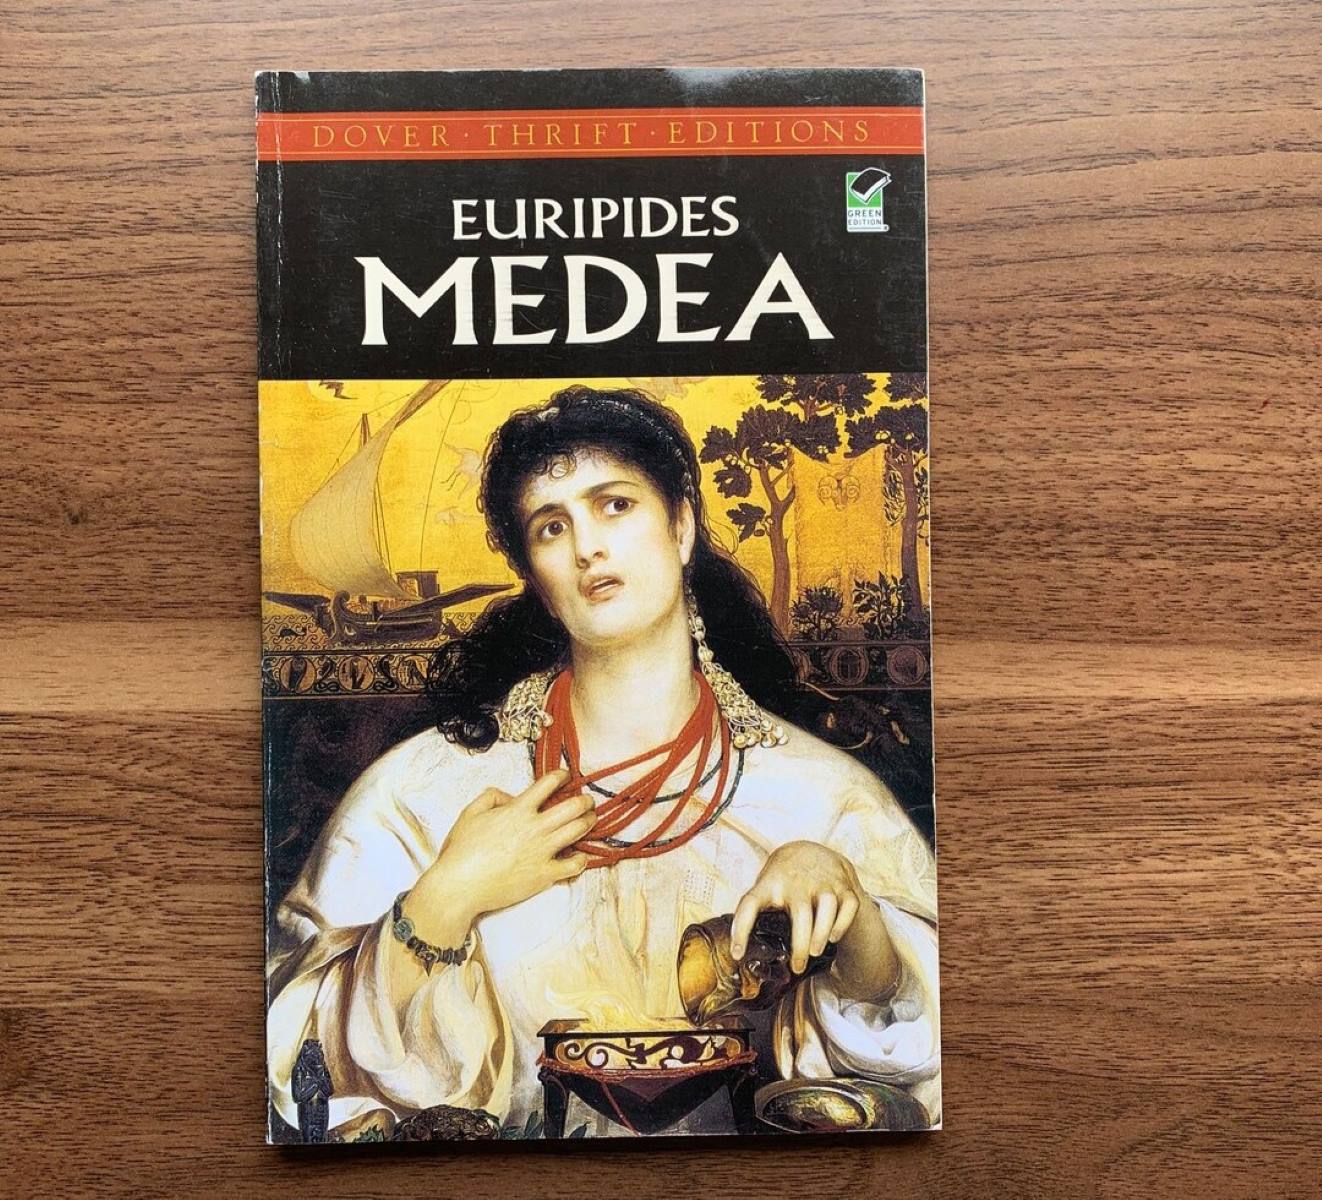 11-extraordinary-facts-about-medea-euripides